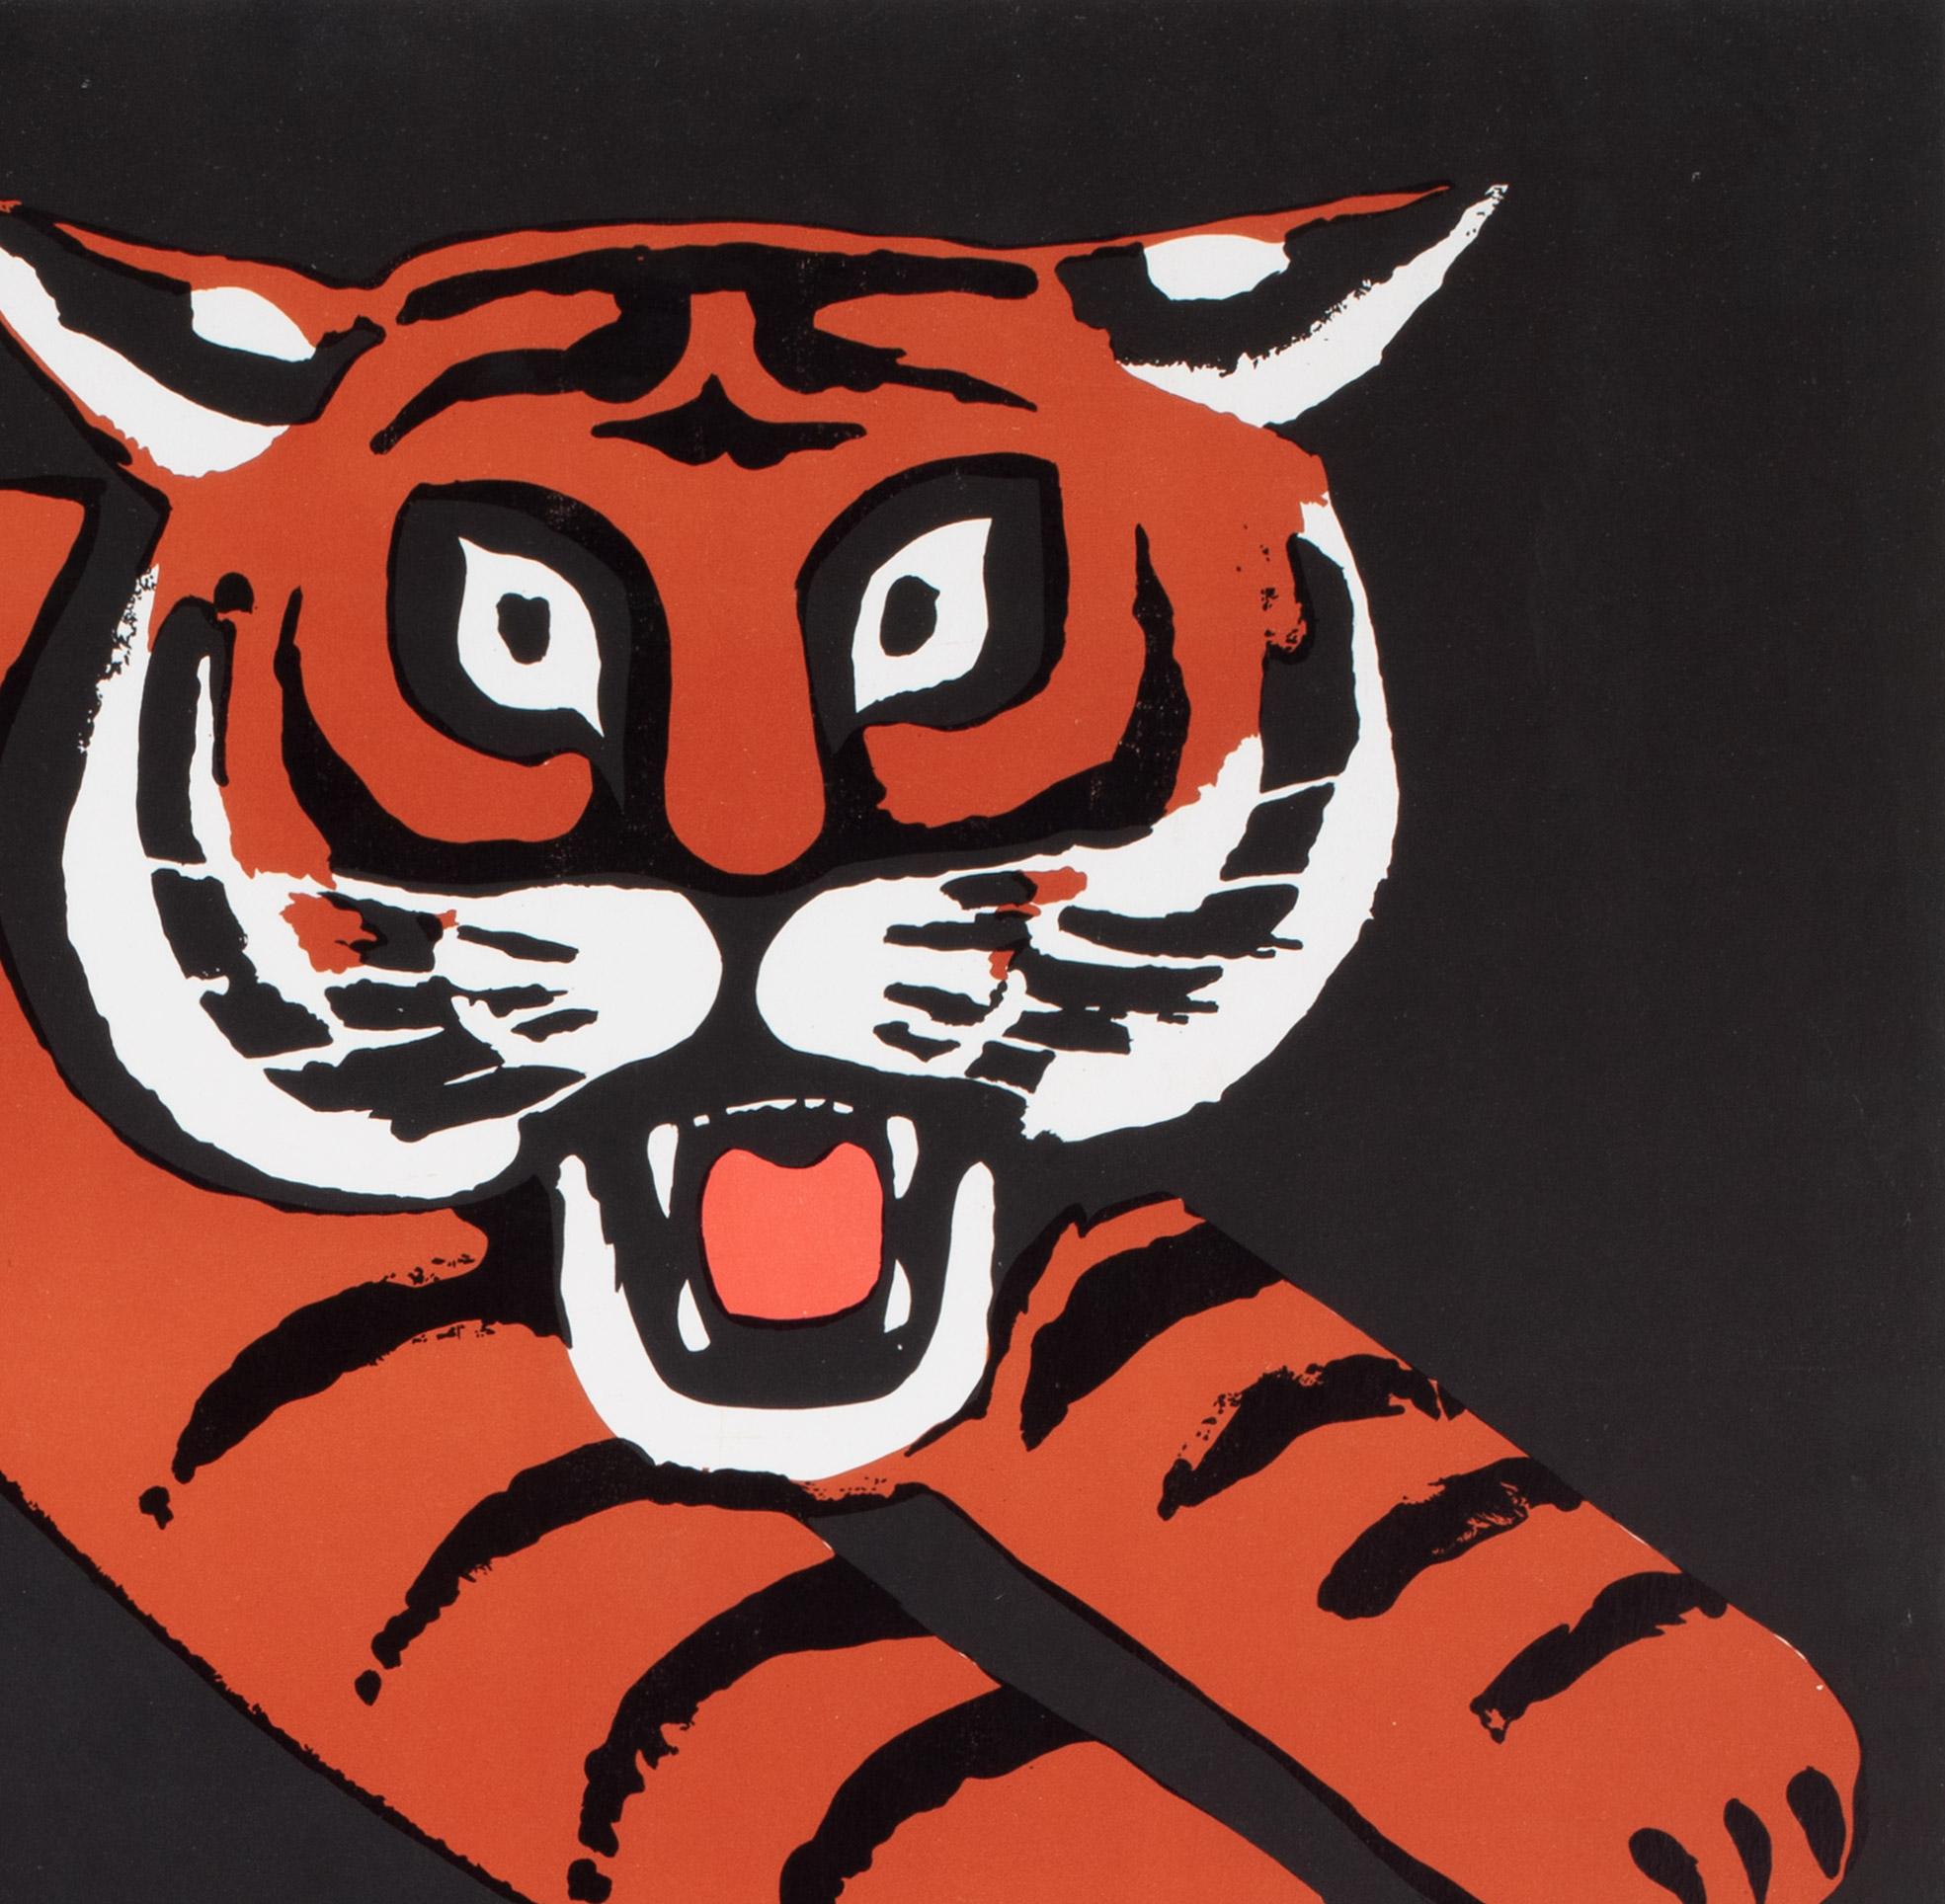 Cyrk Two Growling Tigers R1979 Polish Circus Poster, Wiktor Gorka In Good Condition For Sale In Bath, Somerset